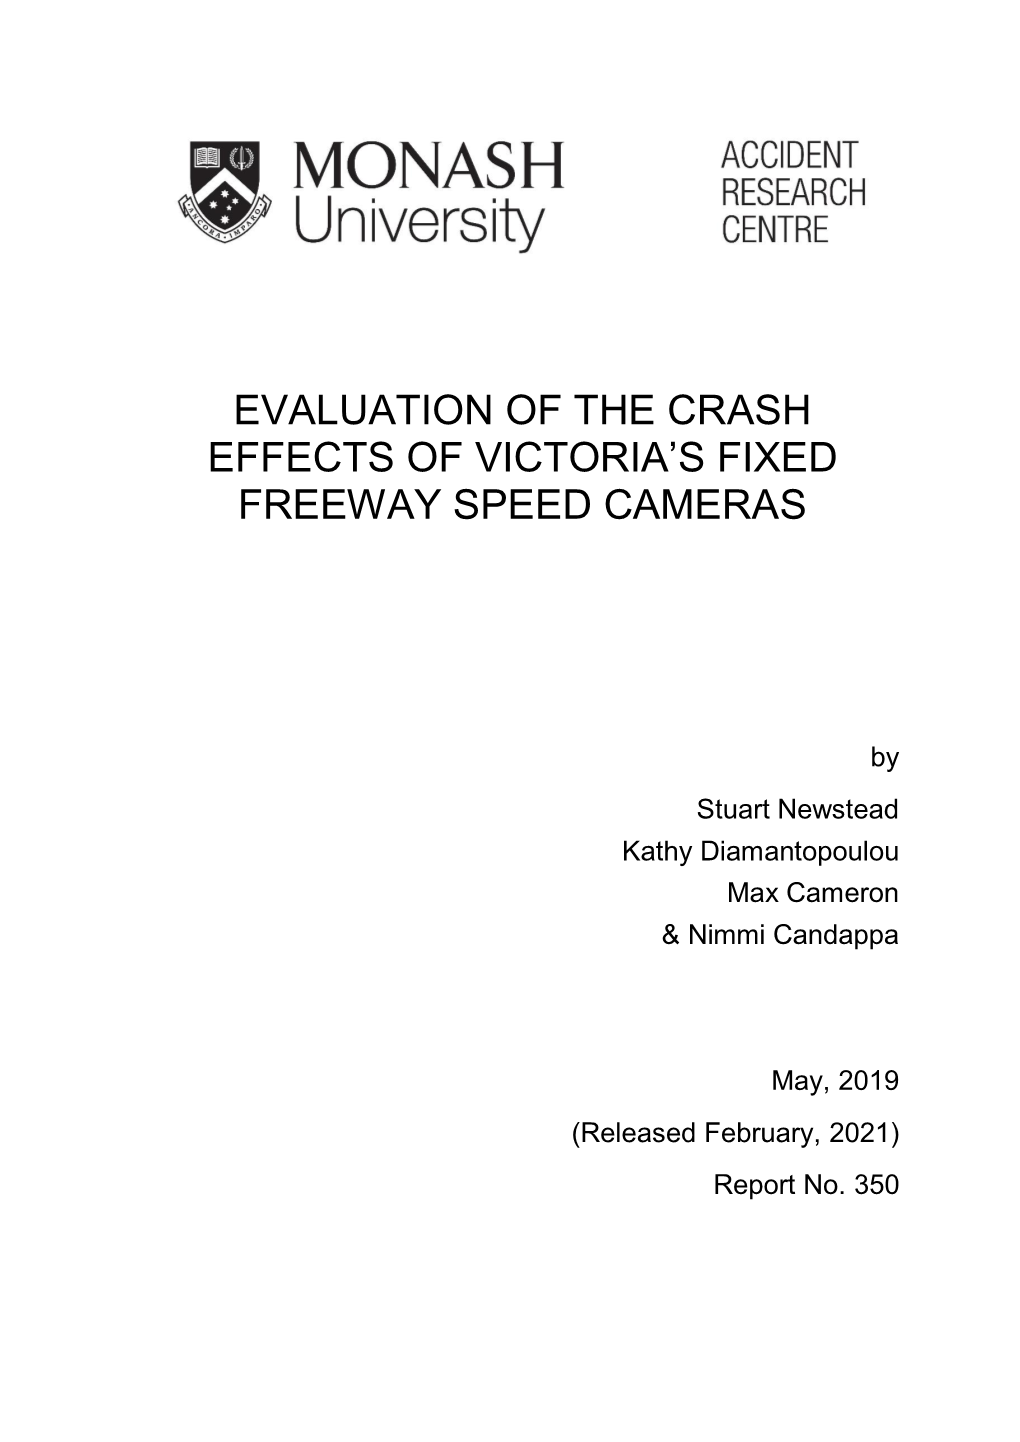 Evaluation of the Crash Effects of Victoria's Fixed Freeway Speed